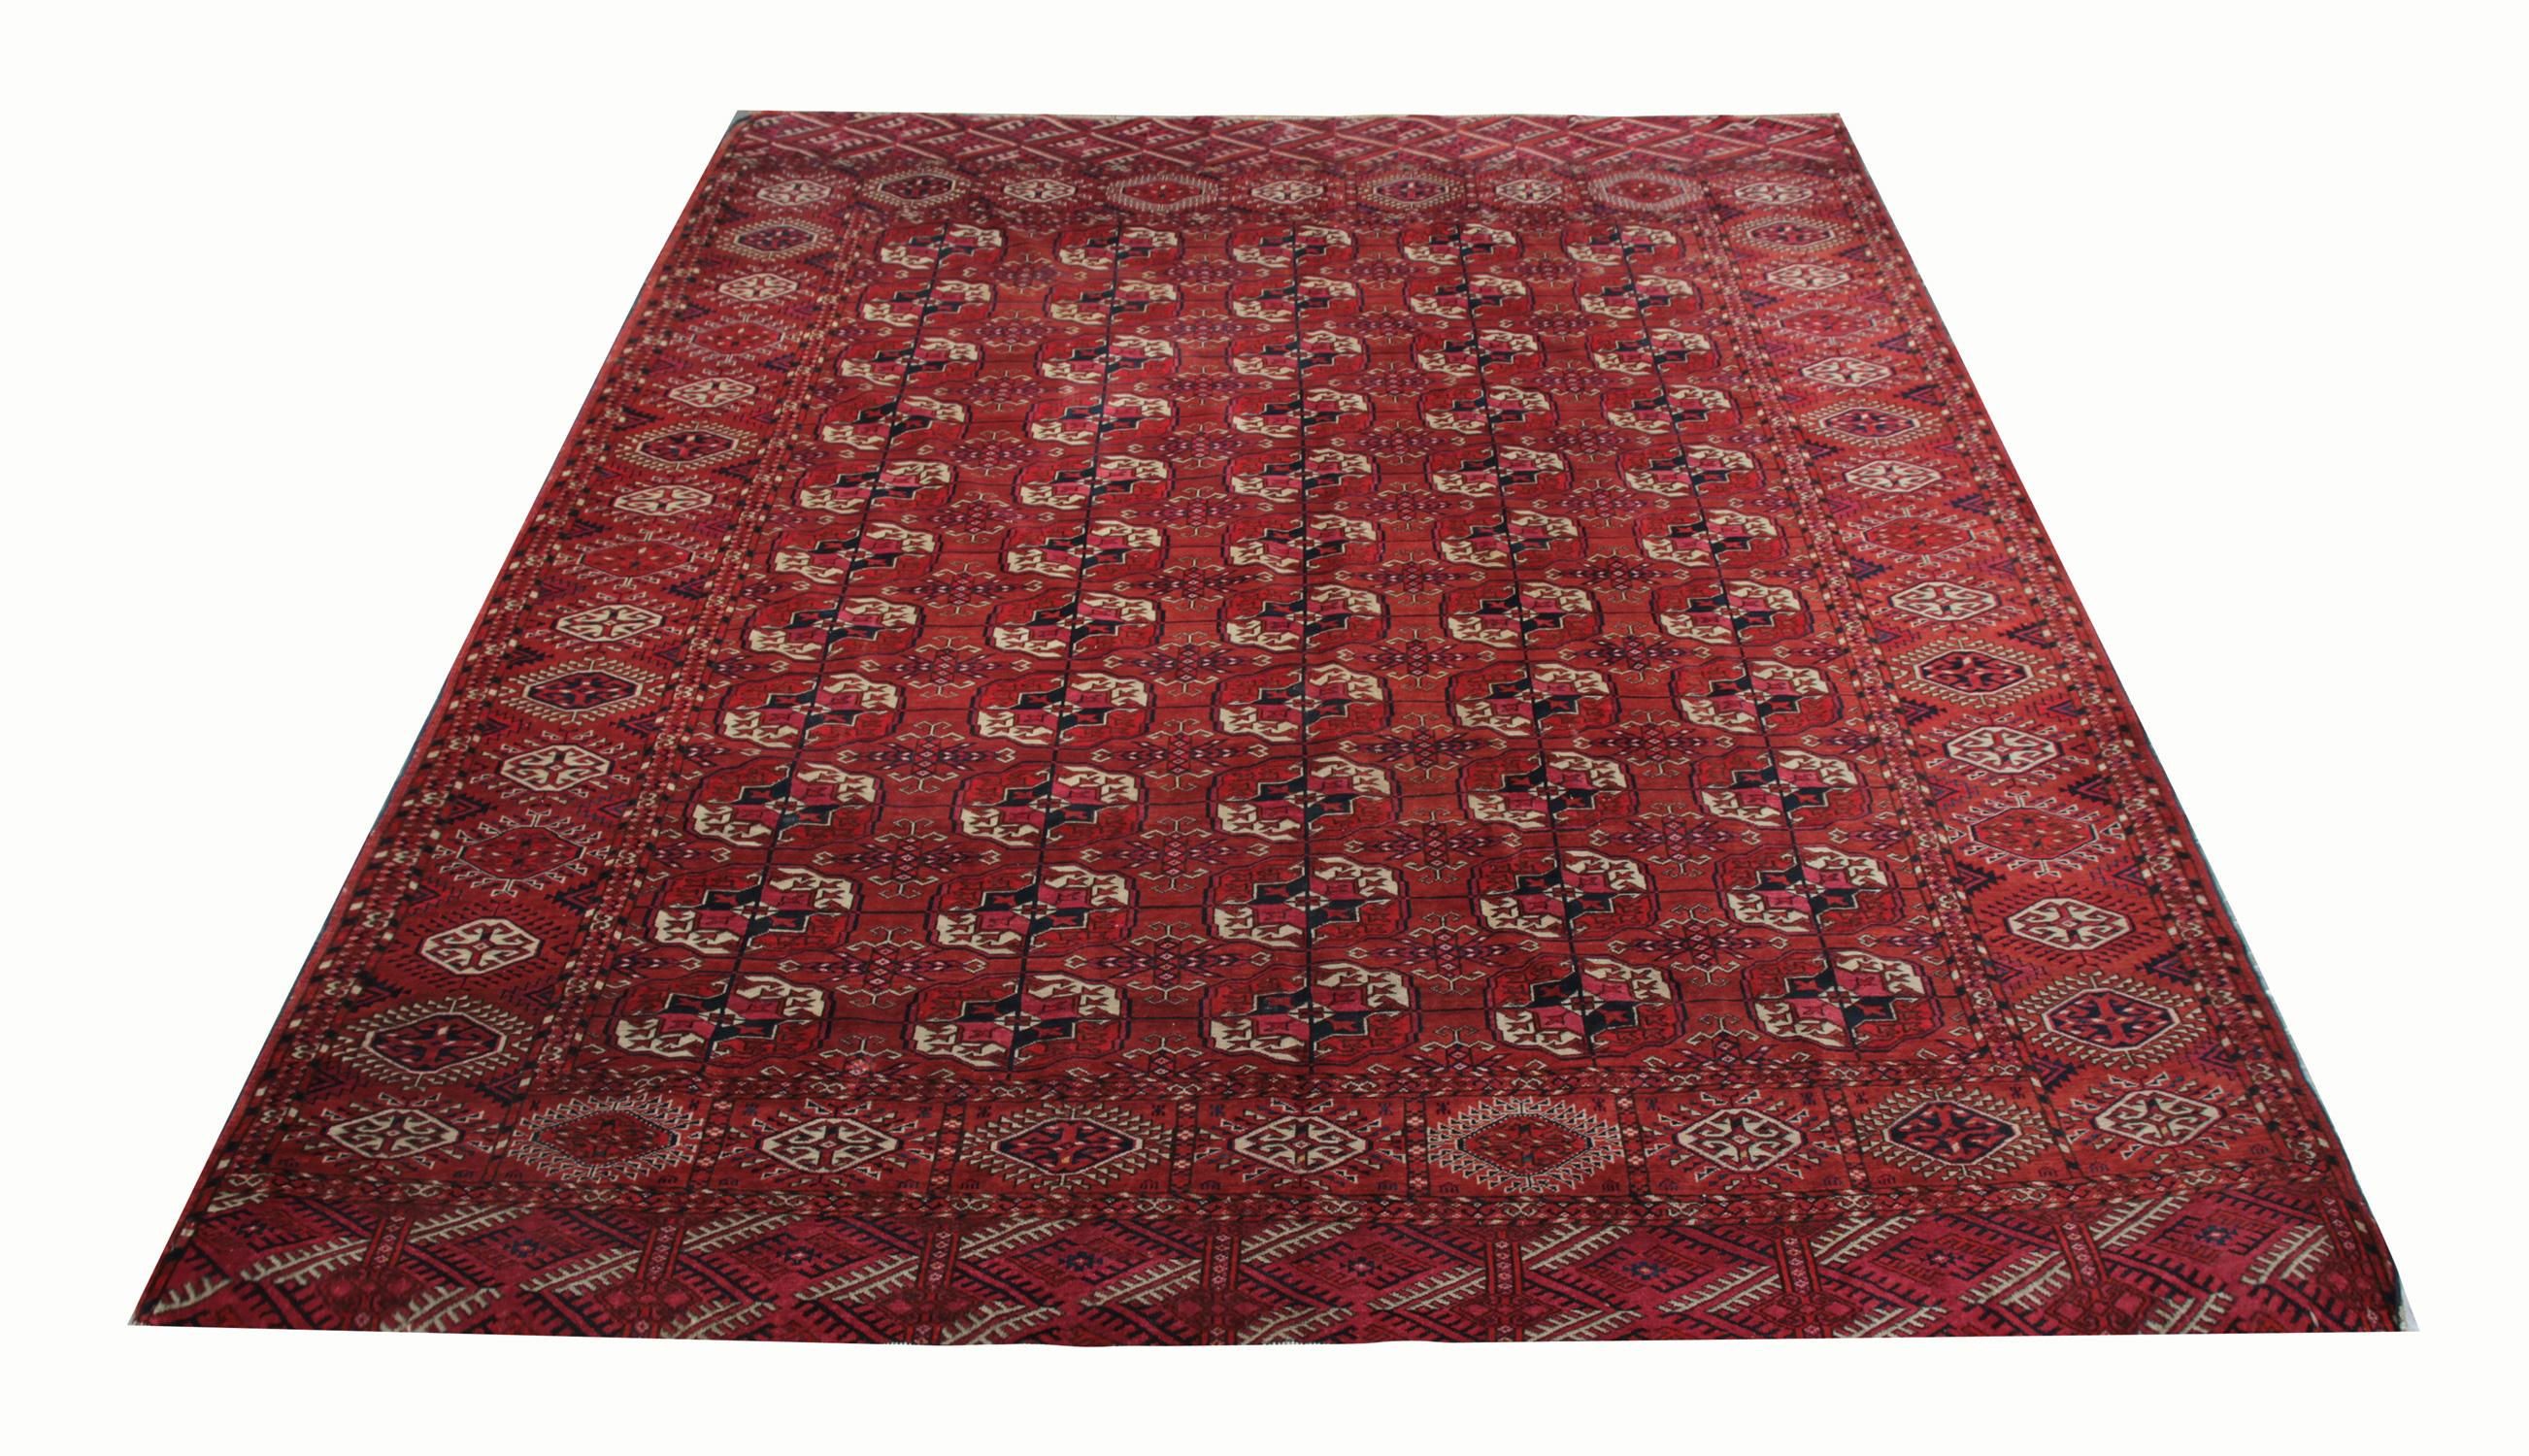 This handmade carpet antique Turkmen rug handwoven wool rug was made using traditional vegetable dyes and handmade by the Turkmen tribespeople. This Rug is predominantly red in colour and has a repeated motif pattern covering the oriental rug. This